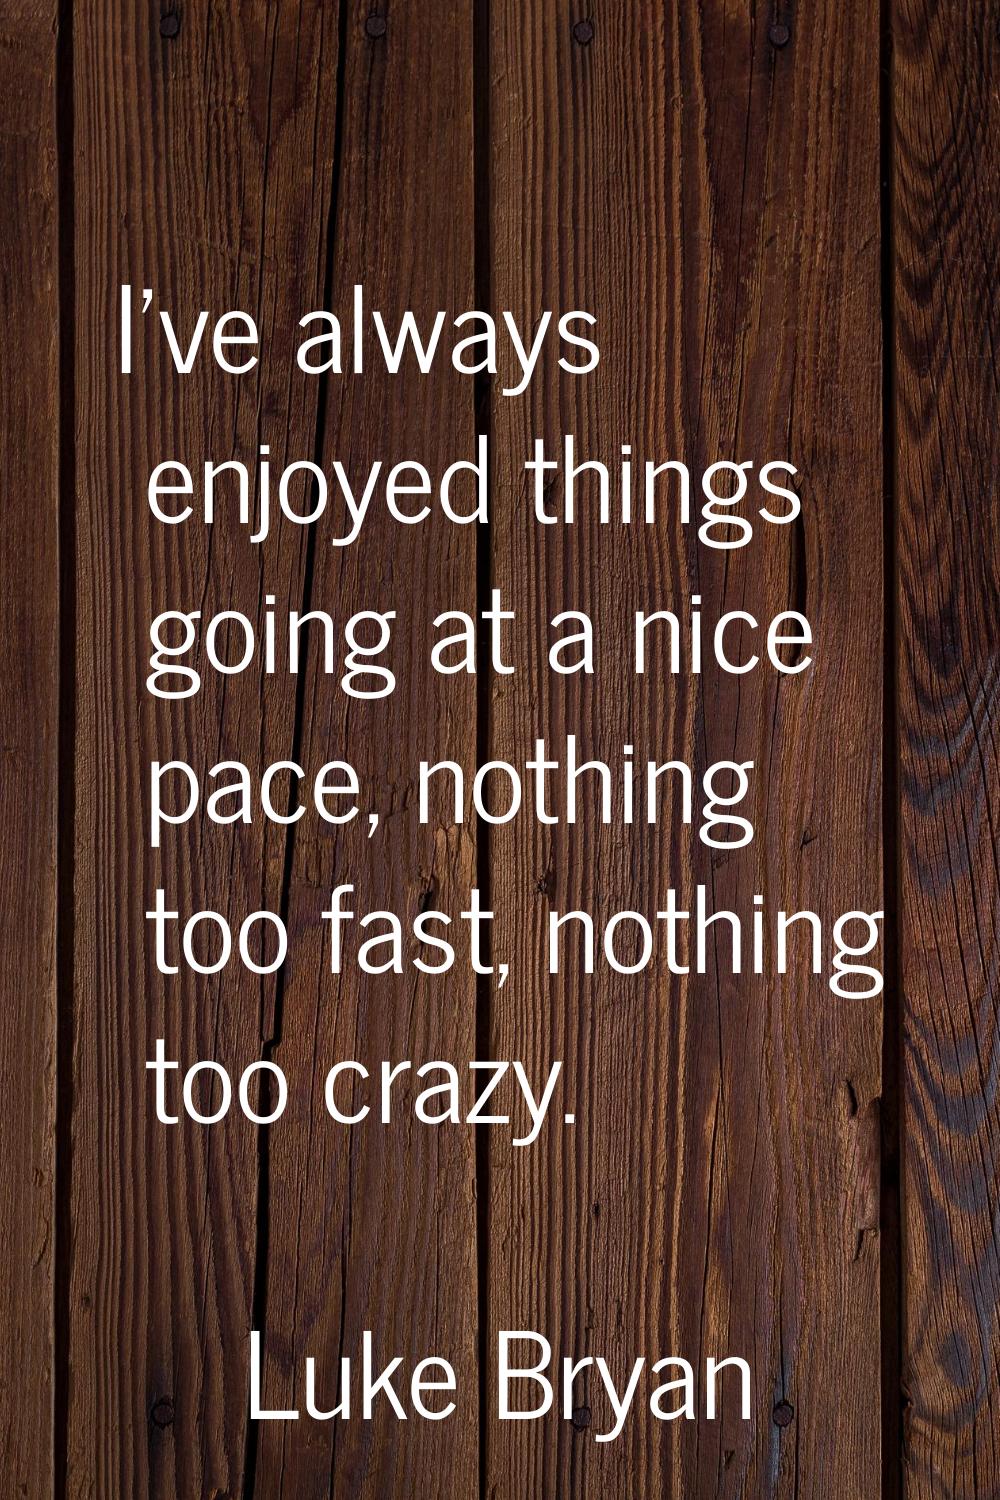 I've always enjoyed things going at a nice pace, nothing too fast, nothing too crazy.